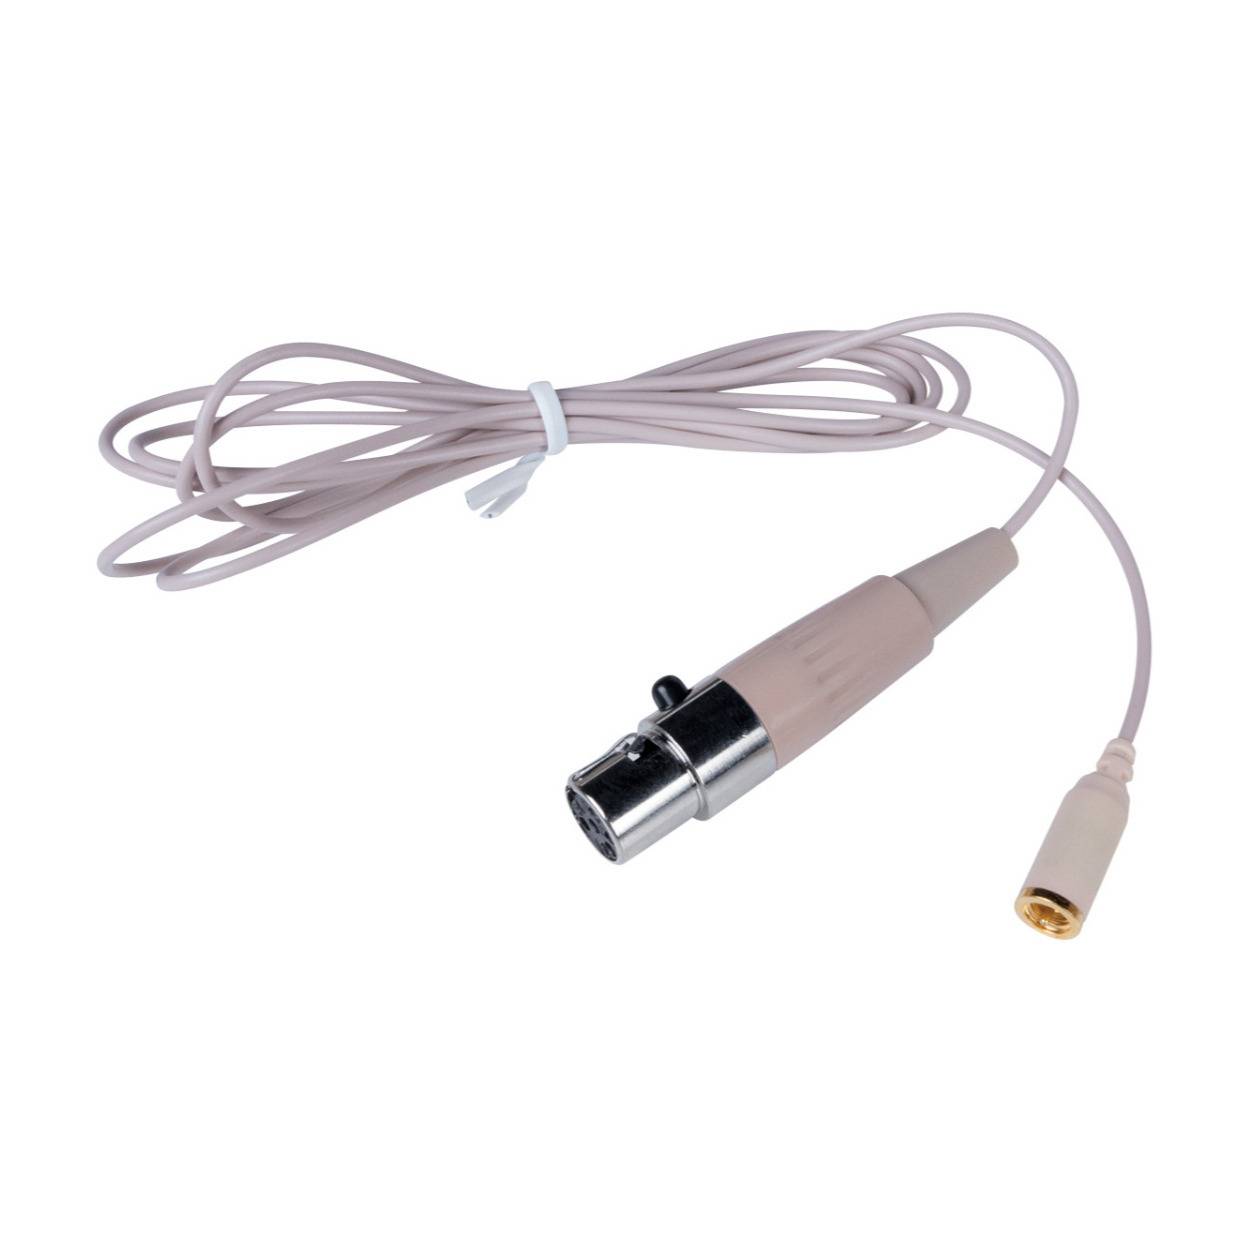 AtlasIED MWOEMCBL Replacement Cable for MWOEM Over-Ear Microphone